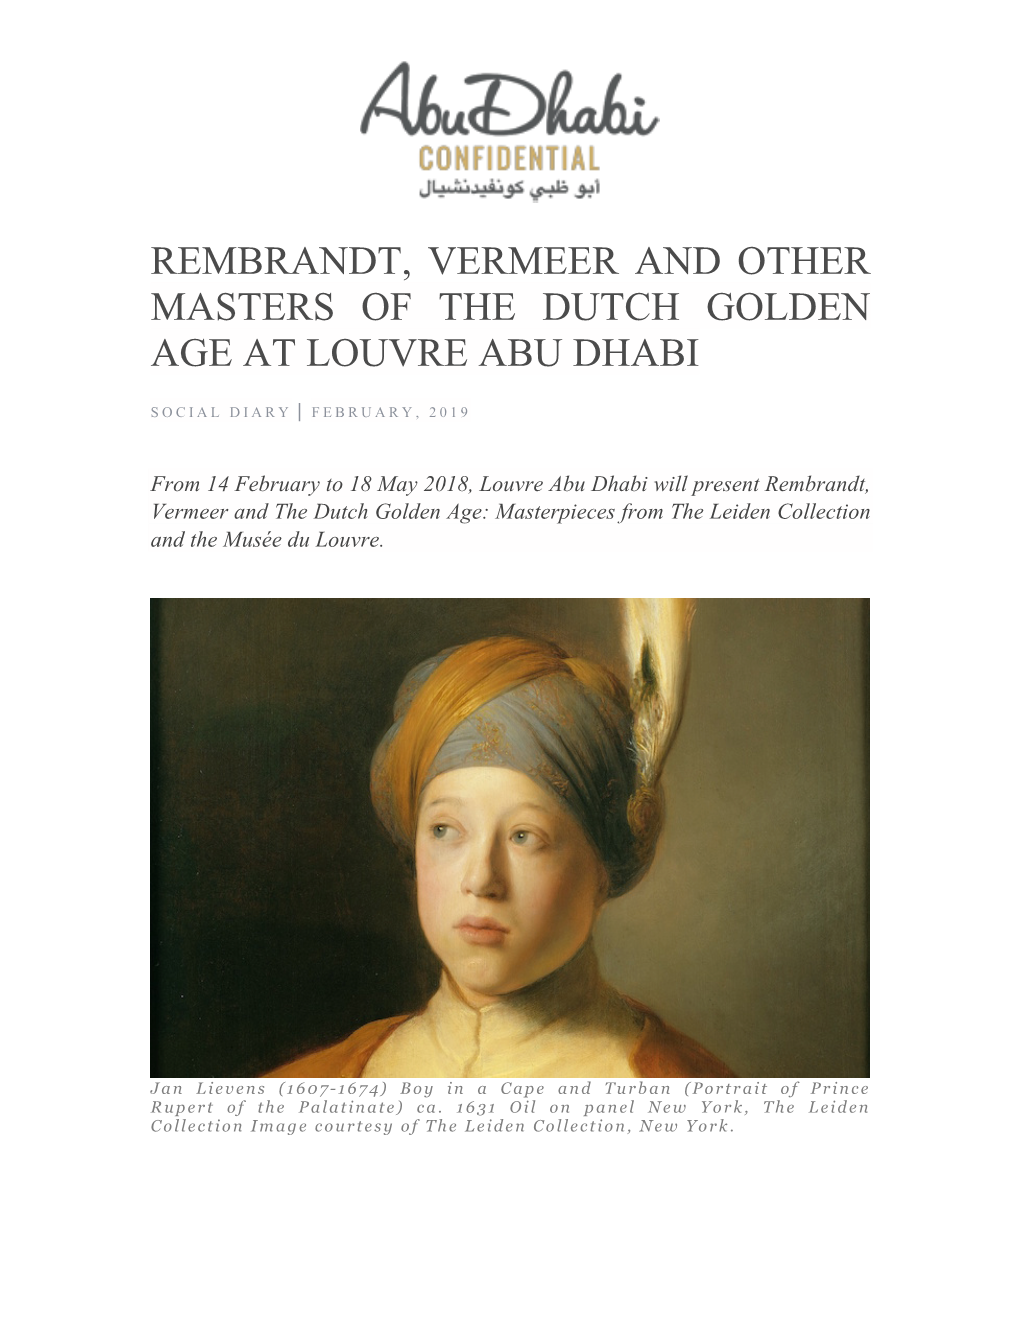 Rembrandt, Vermeer and Other Masters of the Dutch Golden Age at Louvre Abu Dhabi